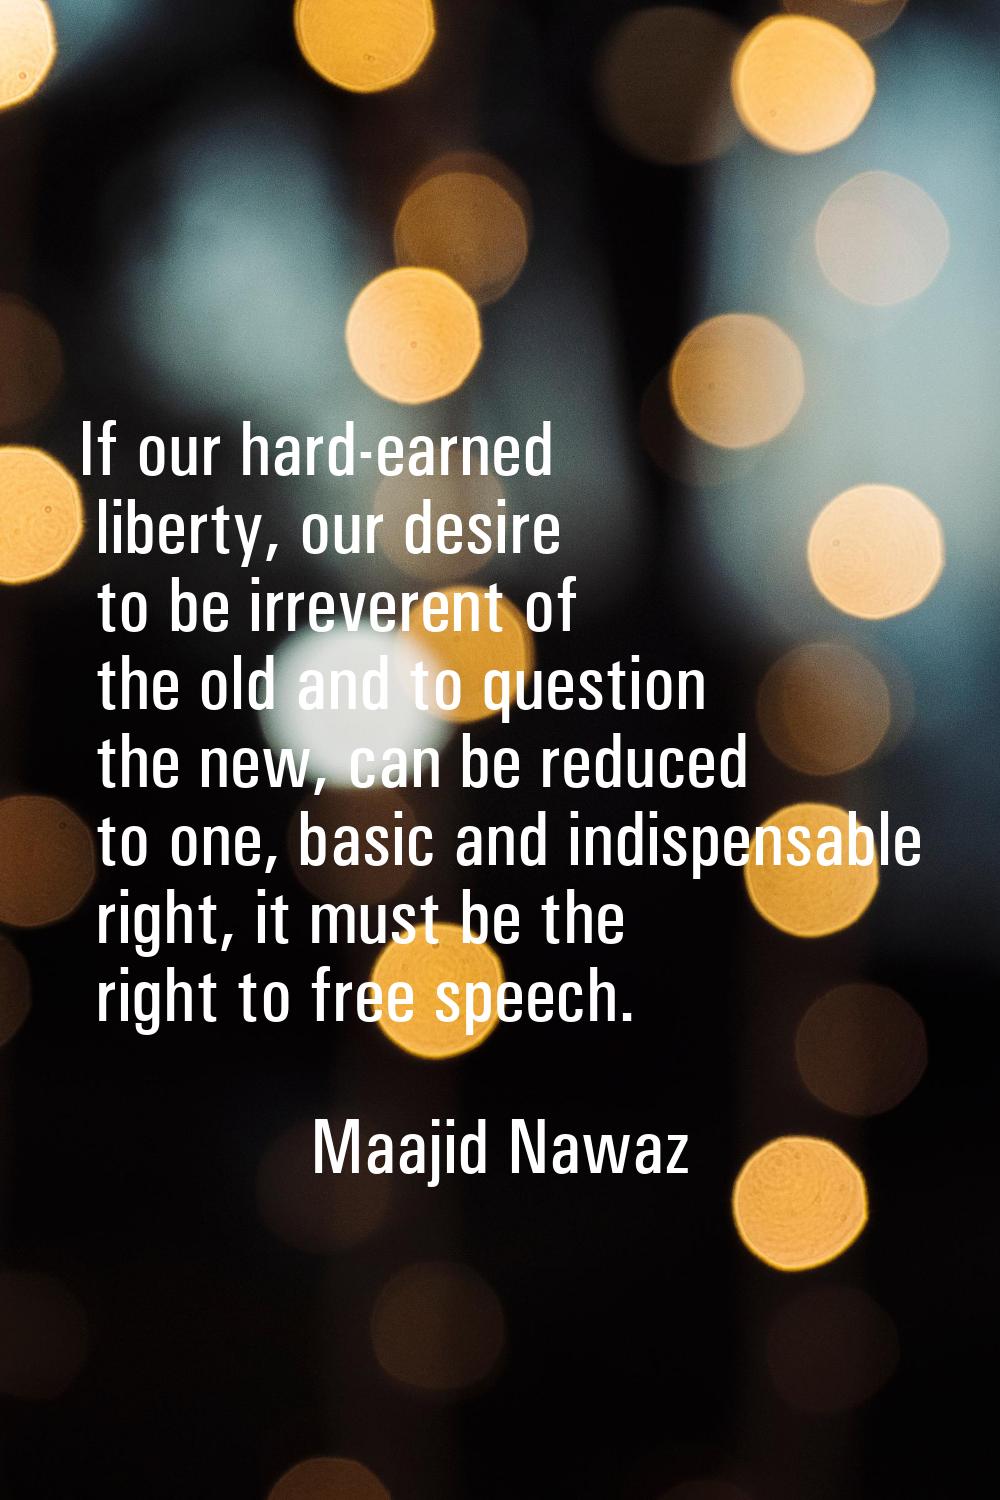 If our hard-earned liberty, our desire to be irreverent of the old and to question the new, can be 